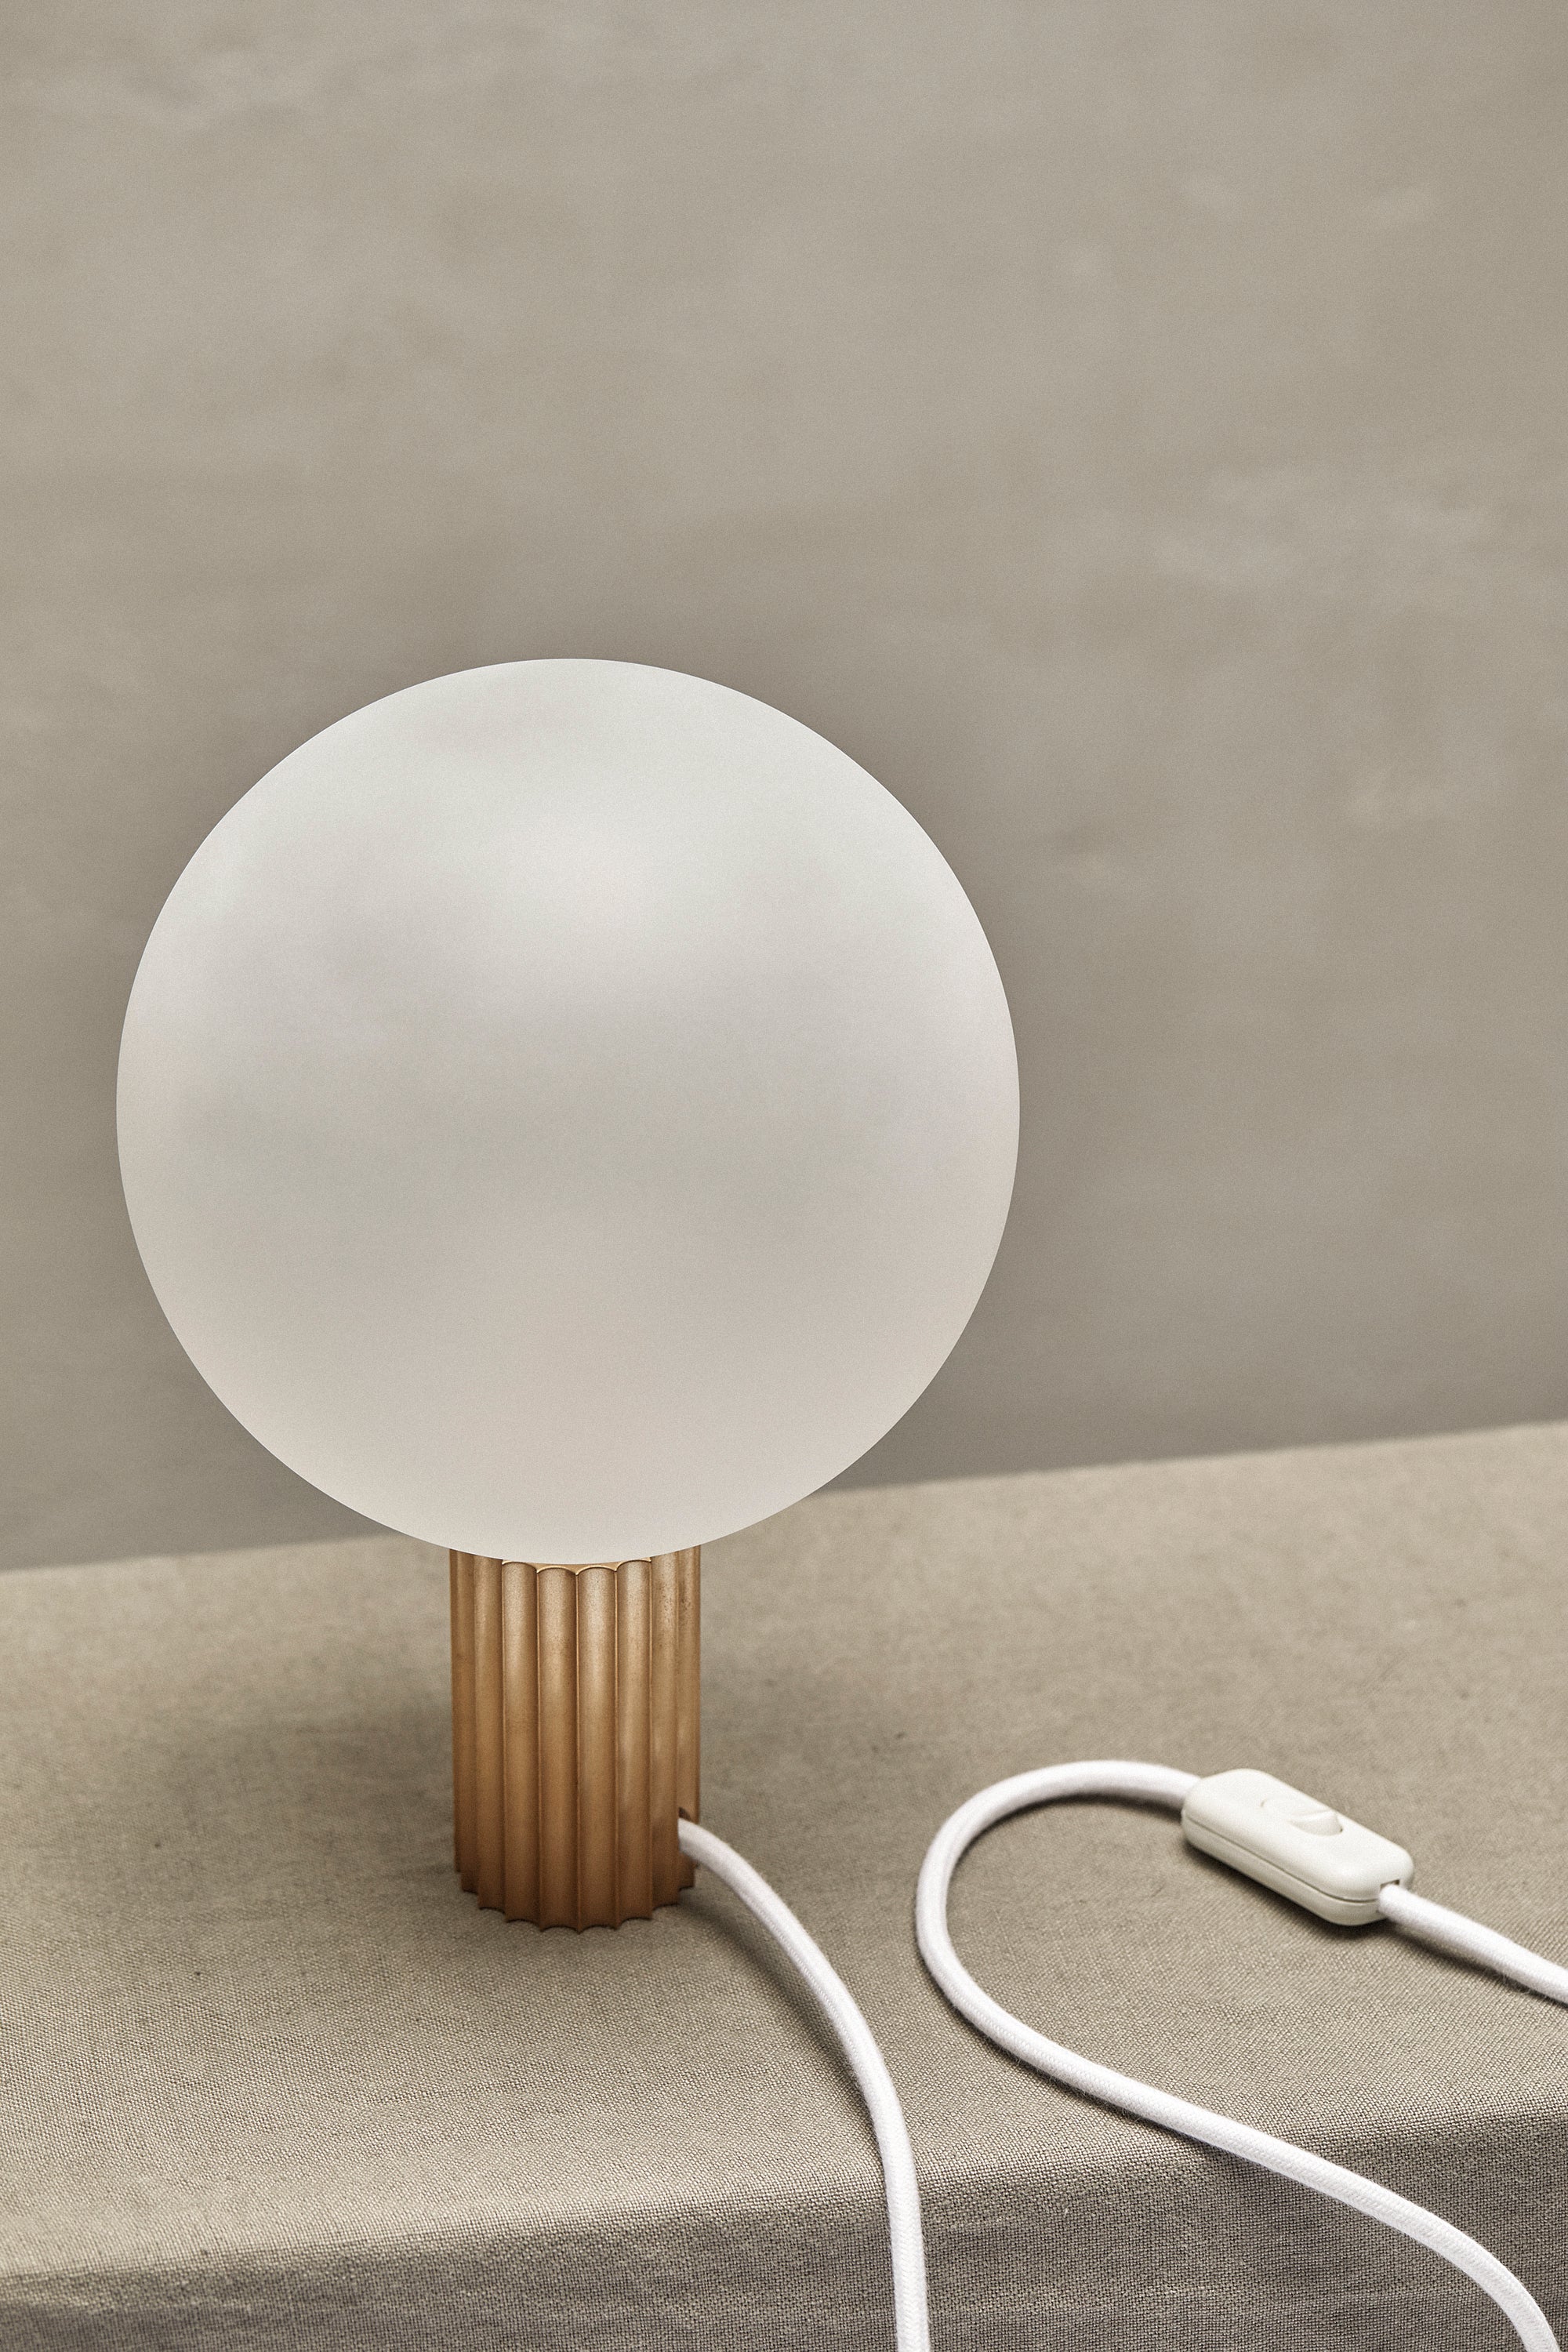 Attalos Table Lamp G200. Photographed by Lawrence Furzey.